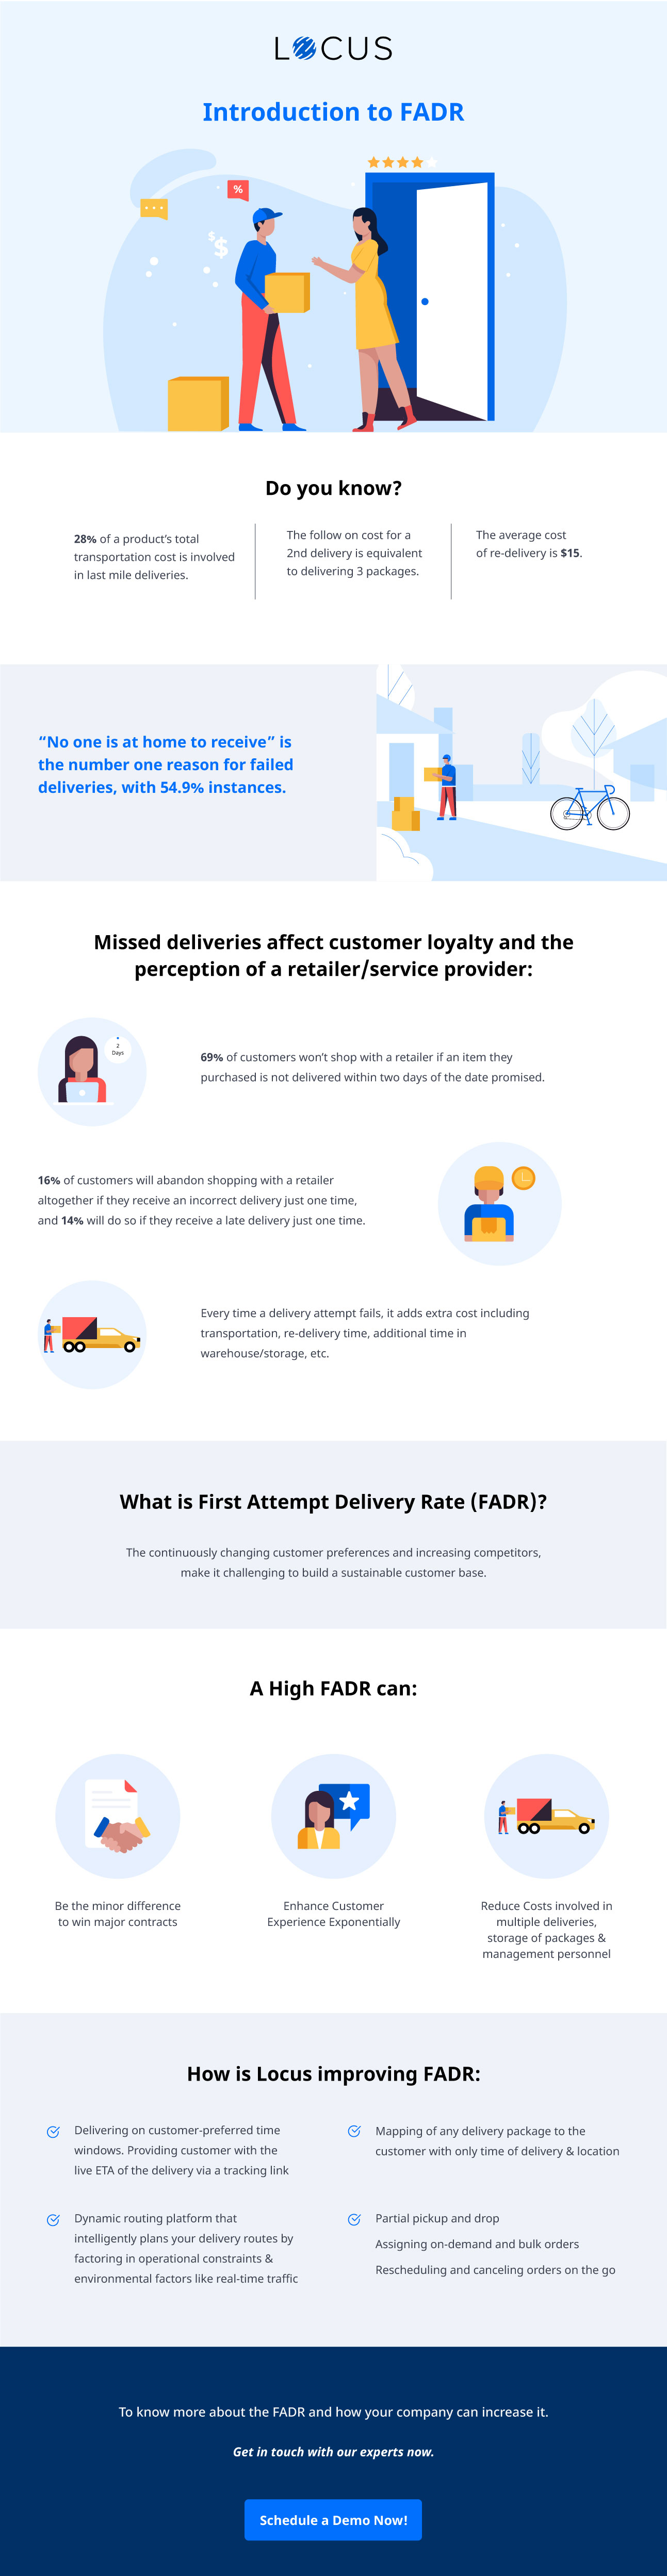 Introducing FADR by Locus | First Attempt Delivery Rate